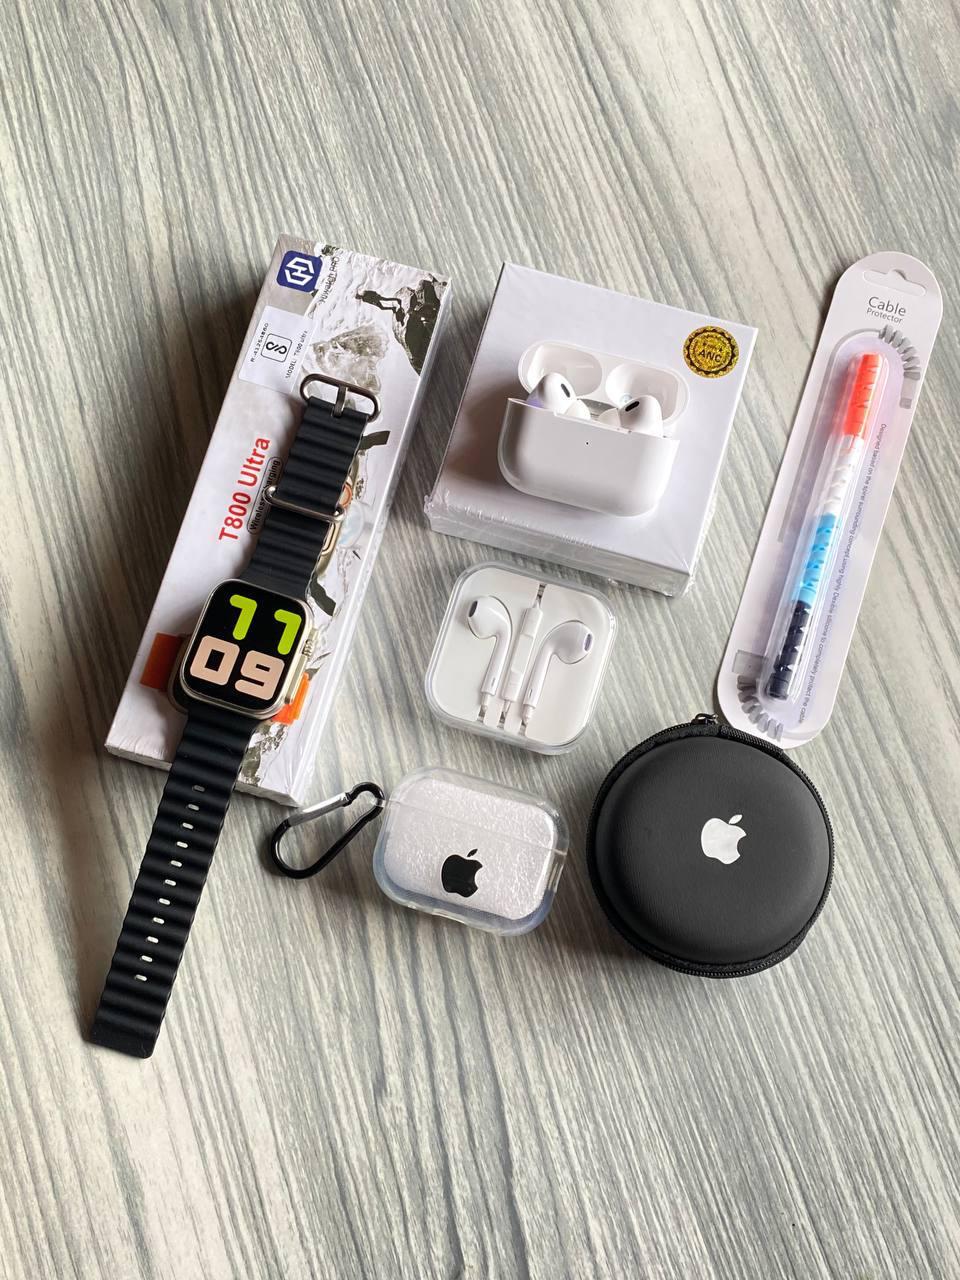 Ultra smartwatch combo with airpods pro 2 case and other Black